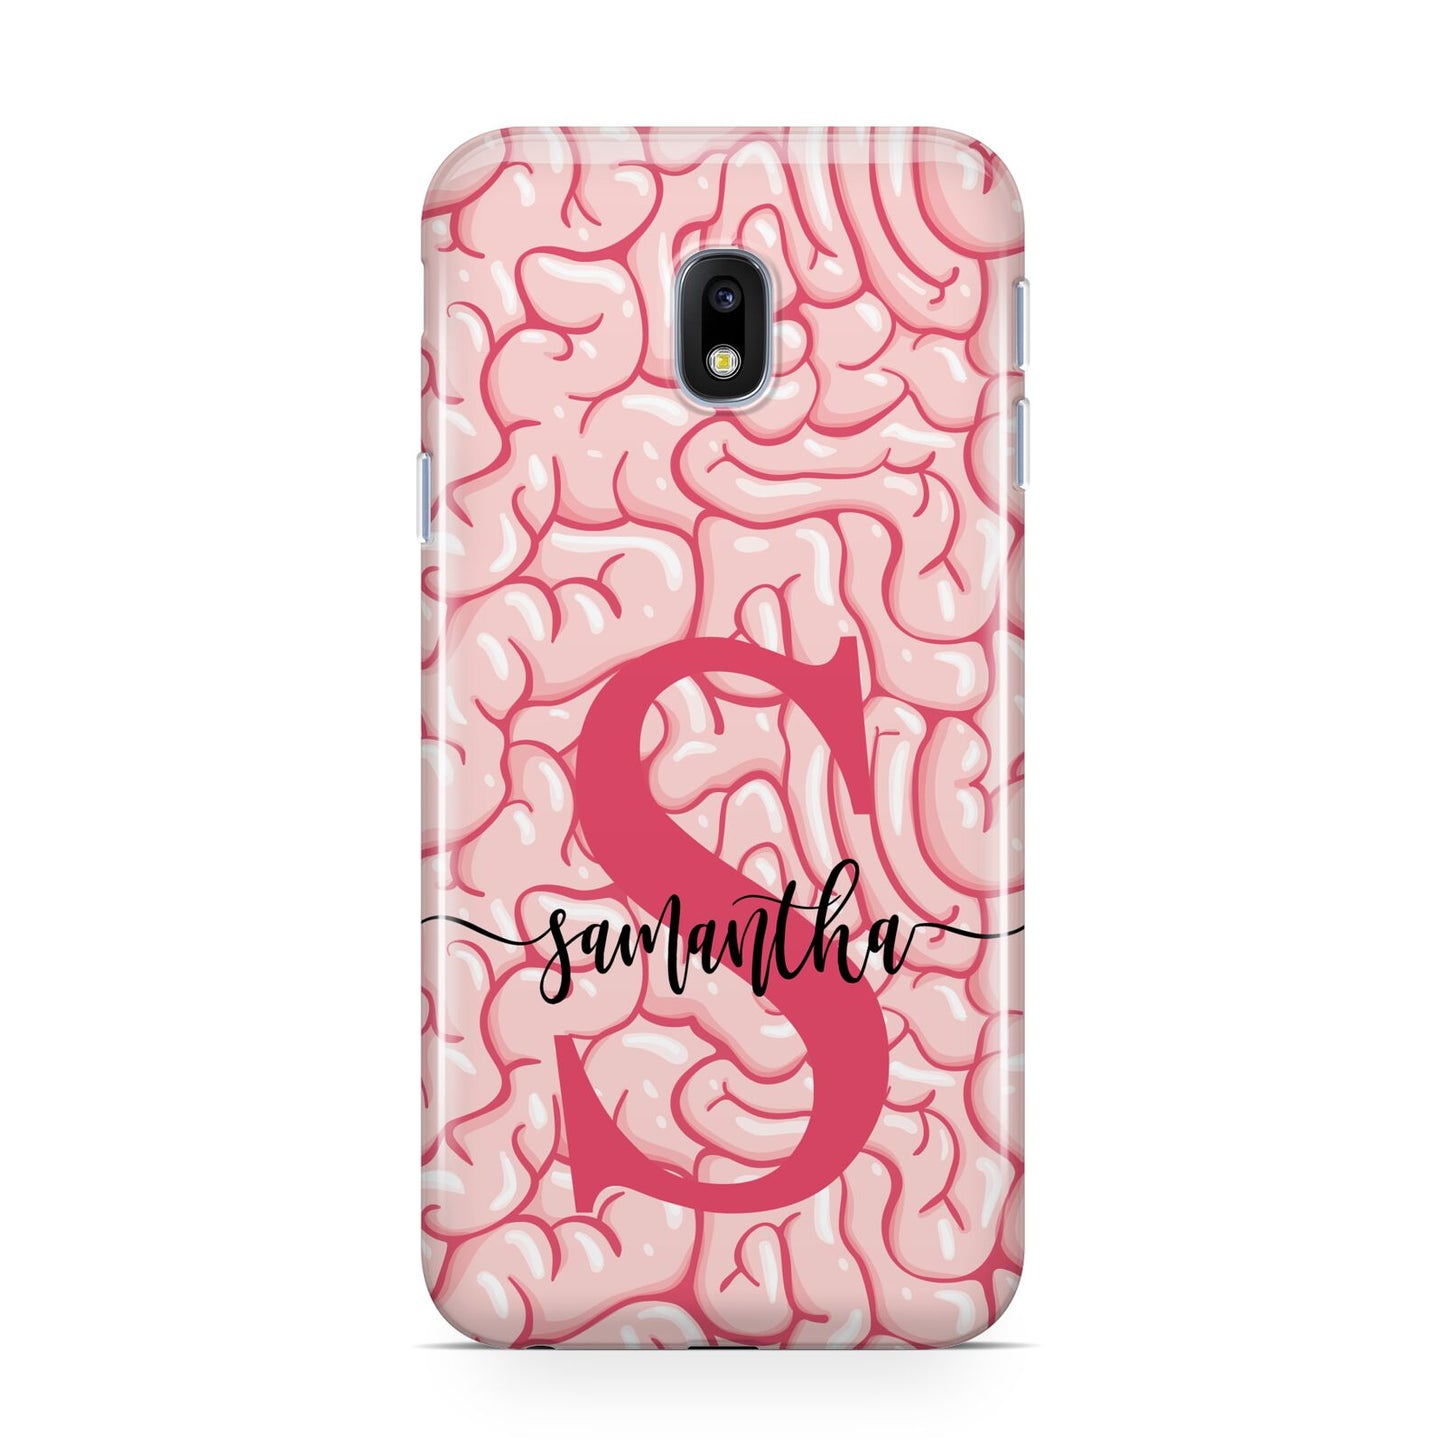 Brain Background with Monogram and Text Samsung Galaxy J3 2017 Case